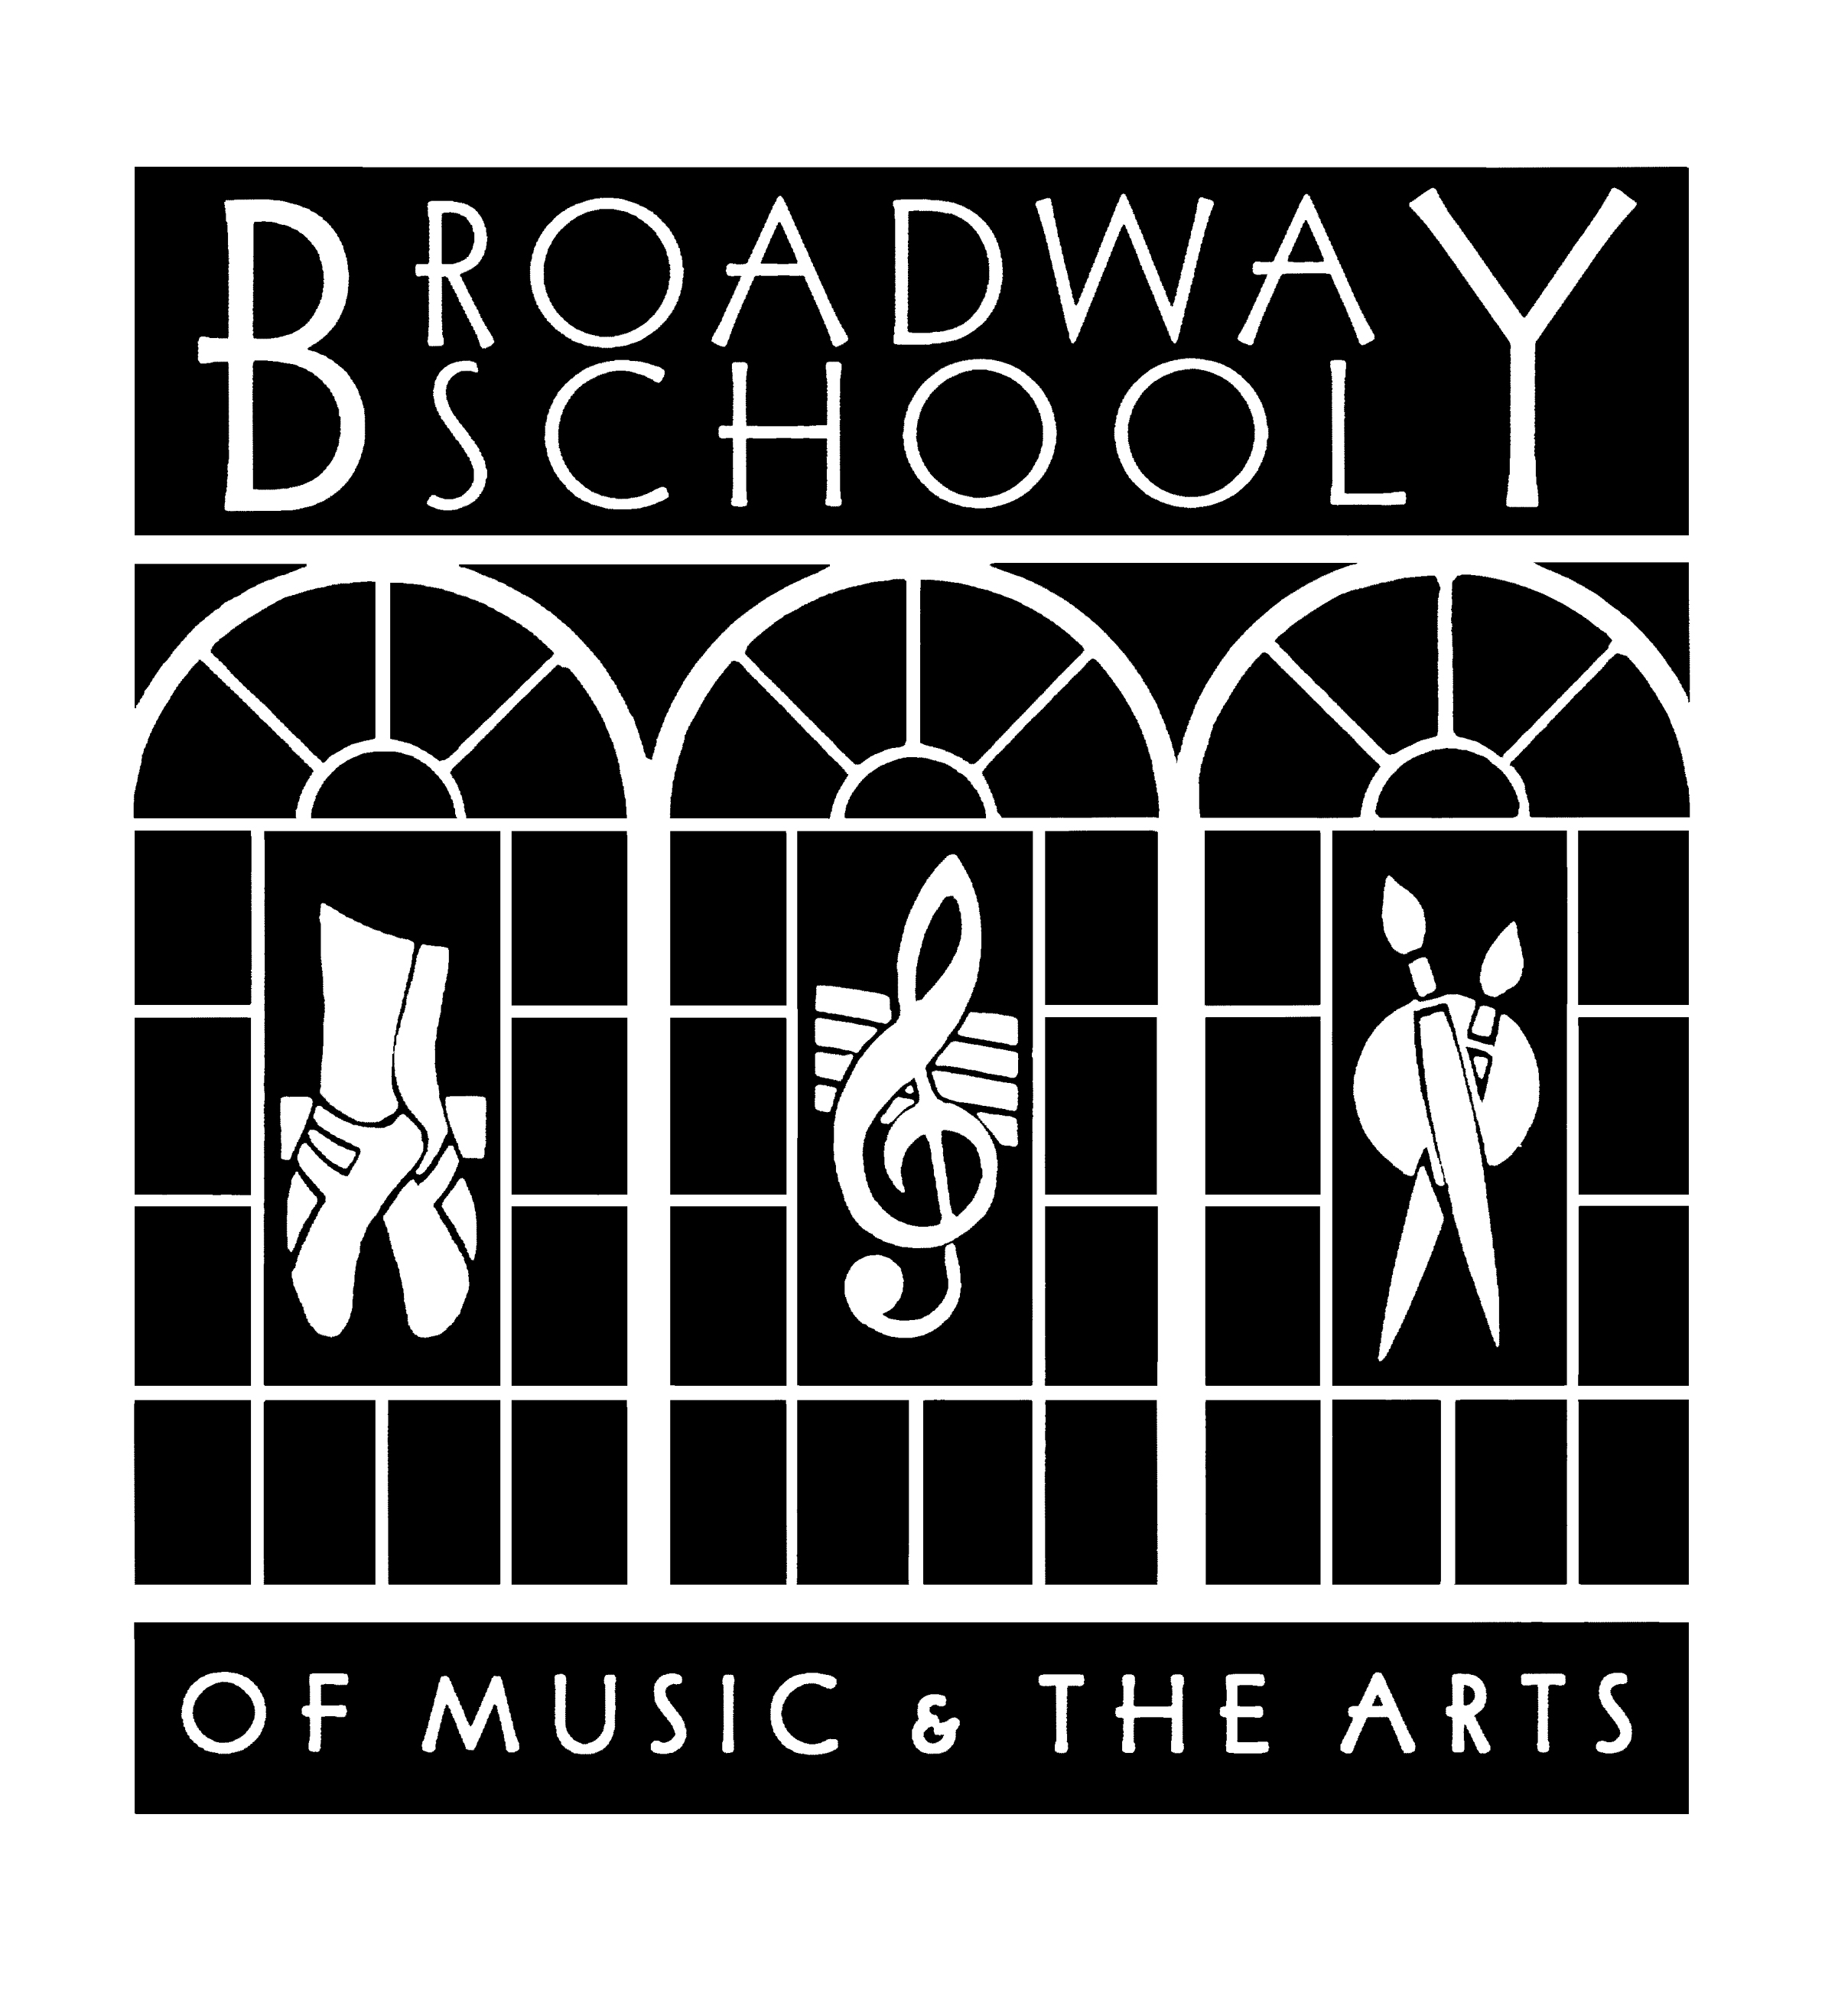 Broadway School of Music and the Arts logo